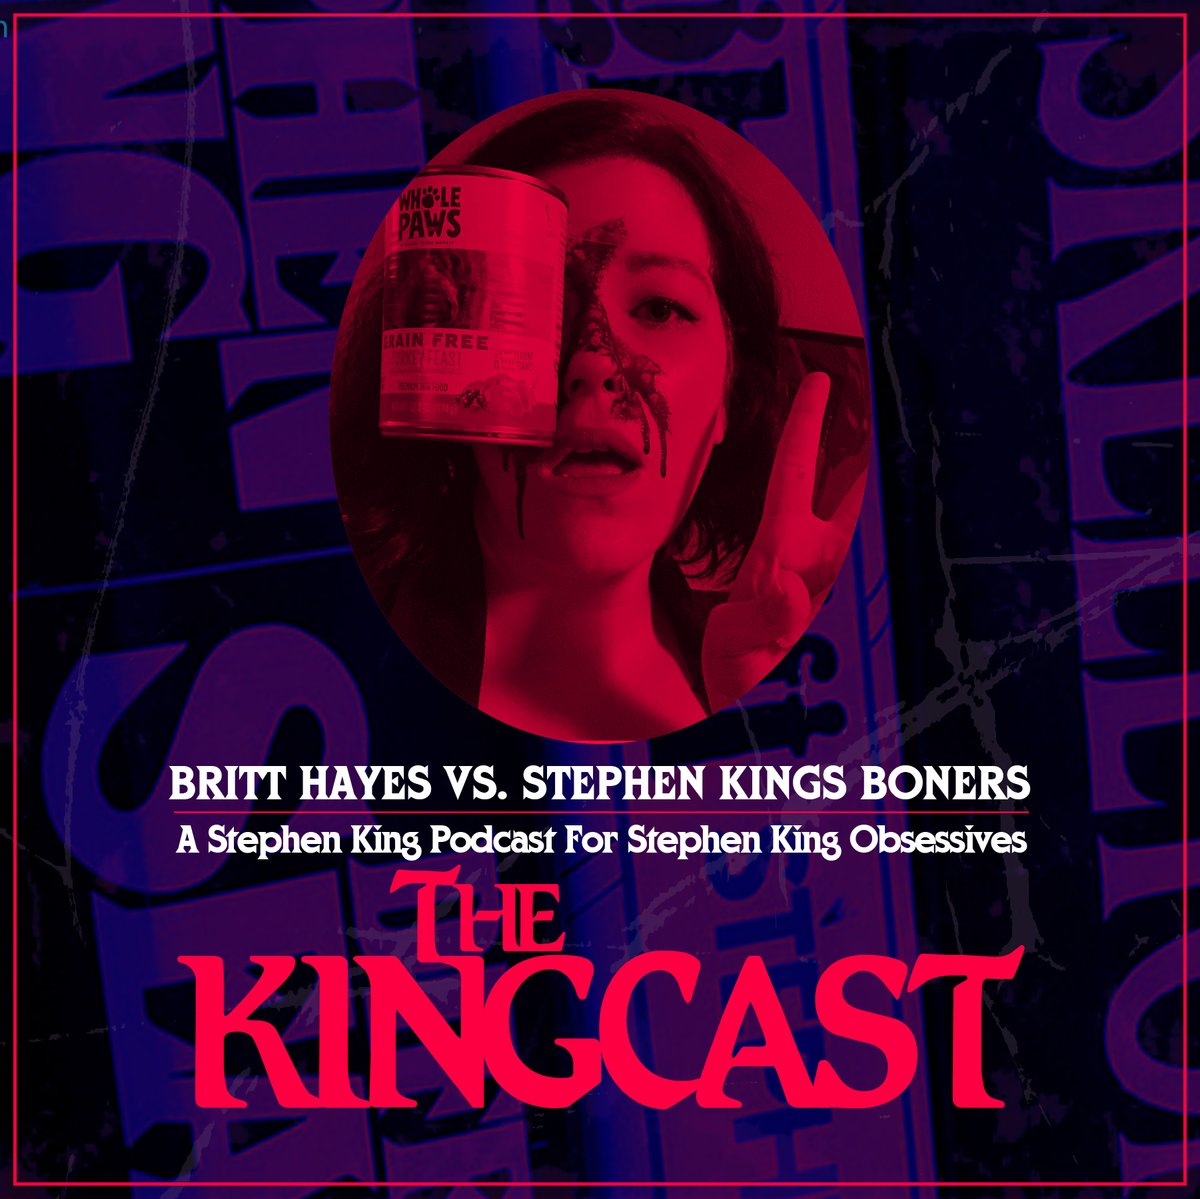 Secondly, we've got an in-depth interview with  @MissBrittHayes, owner and operator of the Stephen King's Boners Tumblr. What has Britt learned while maintaining this VERY specific, very important Stephen King historical document? Plenty.